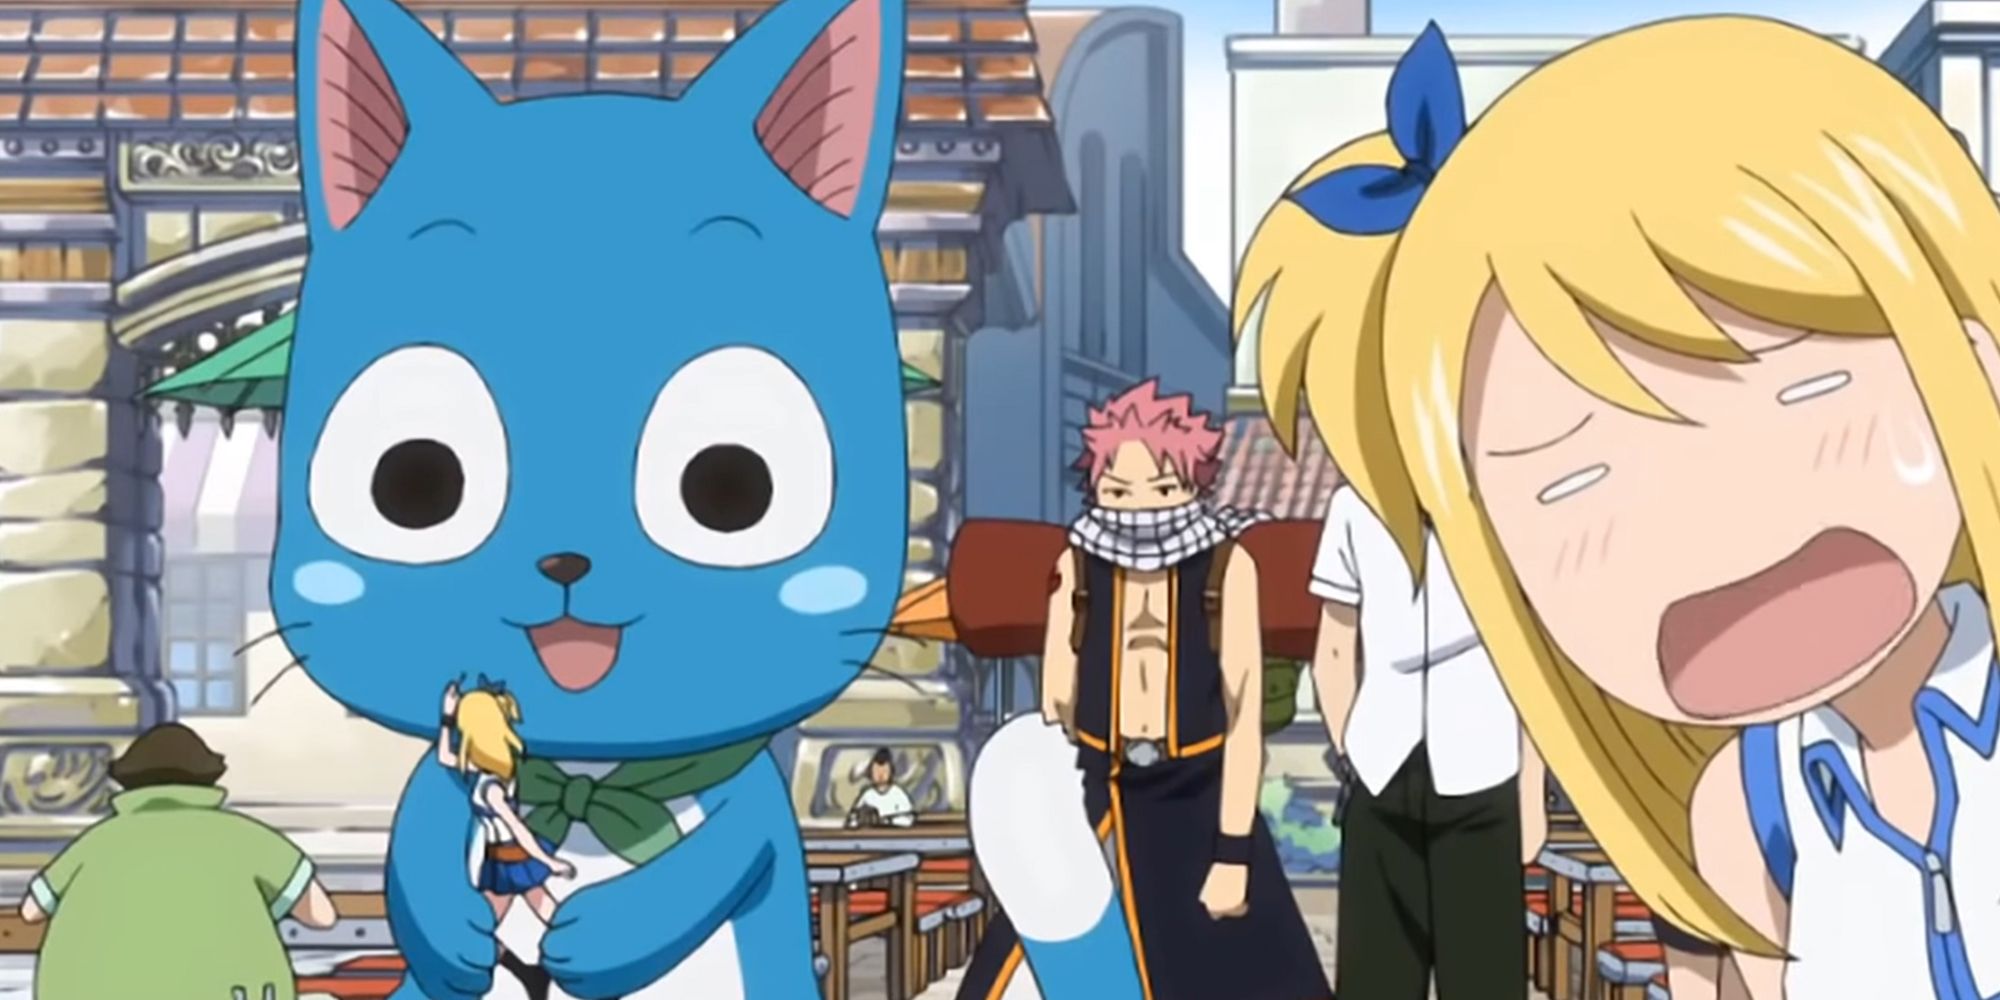 Fairy Tail - Happy The Cat Looking Excitedly At A Toy Of Lucy